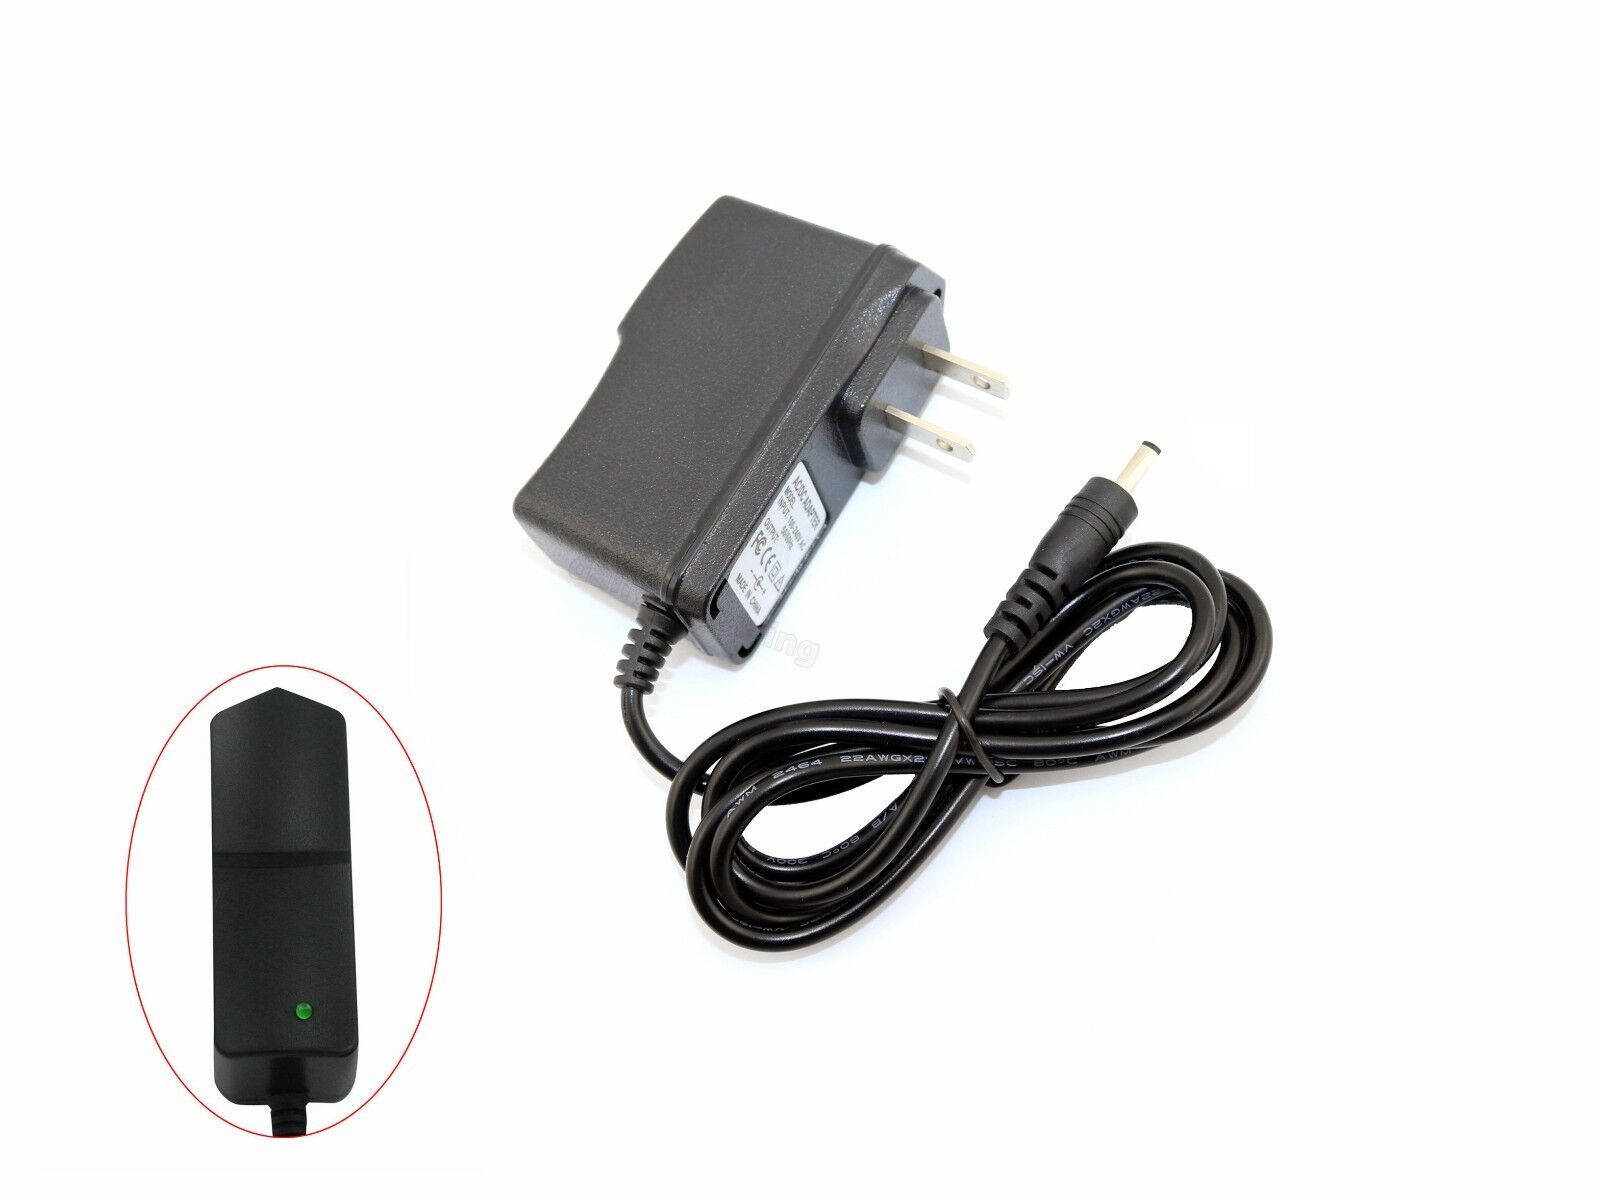 Primary image for AC 100V-240V Converter Adapter DC 3.5mm x 1.35mm 5V 2A 2000mA Power Supply Cord